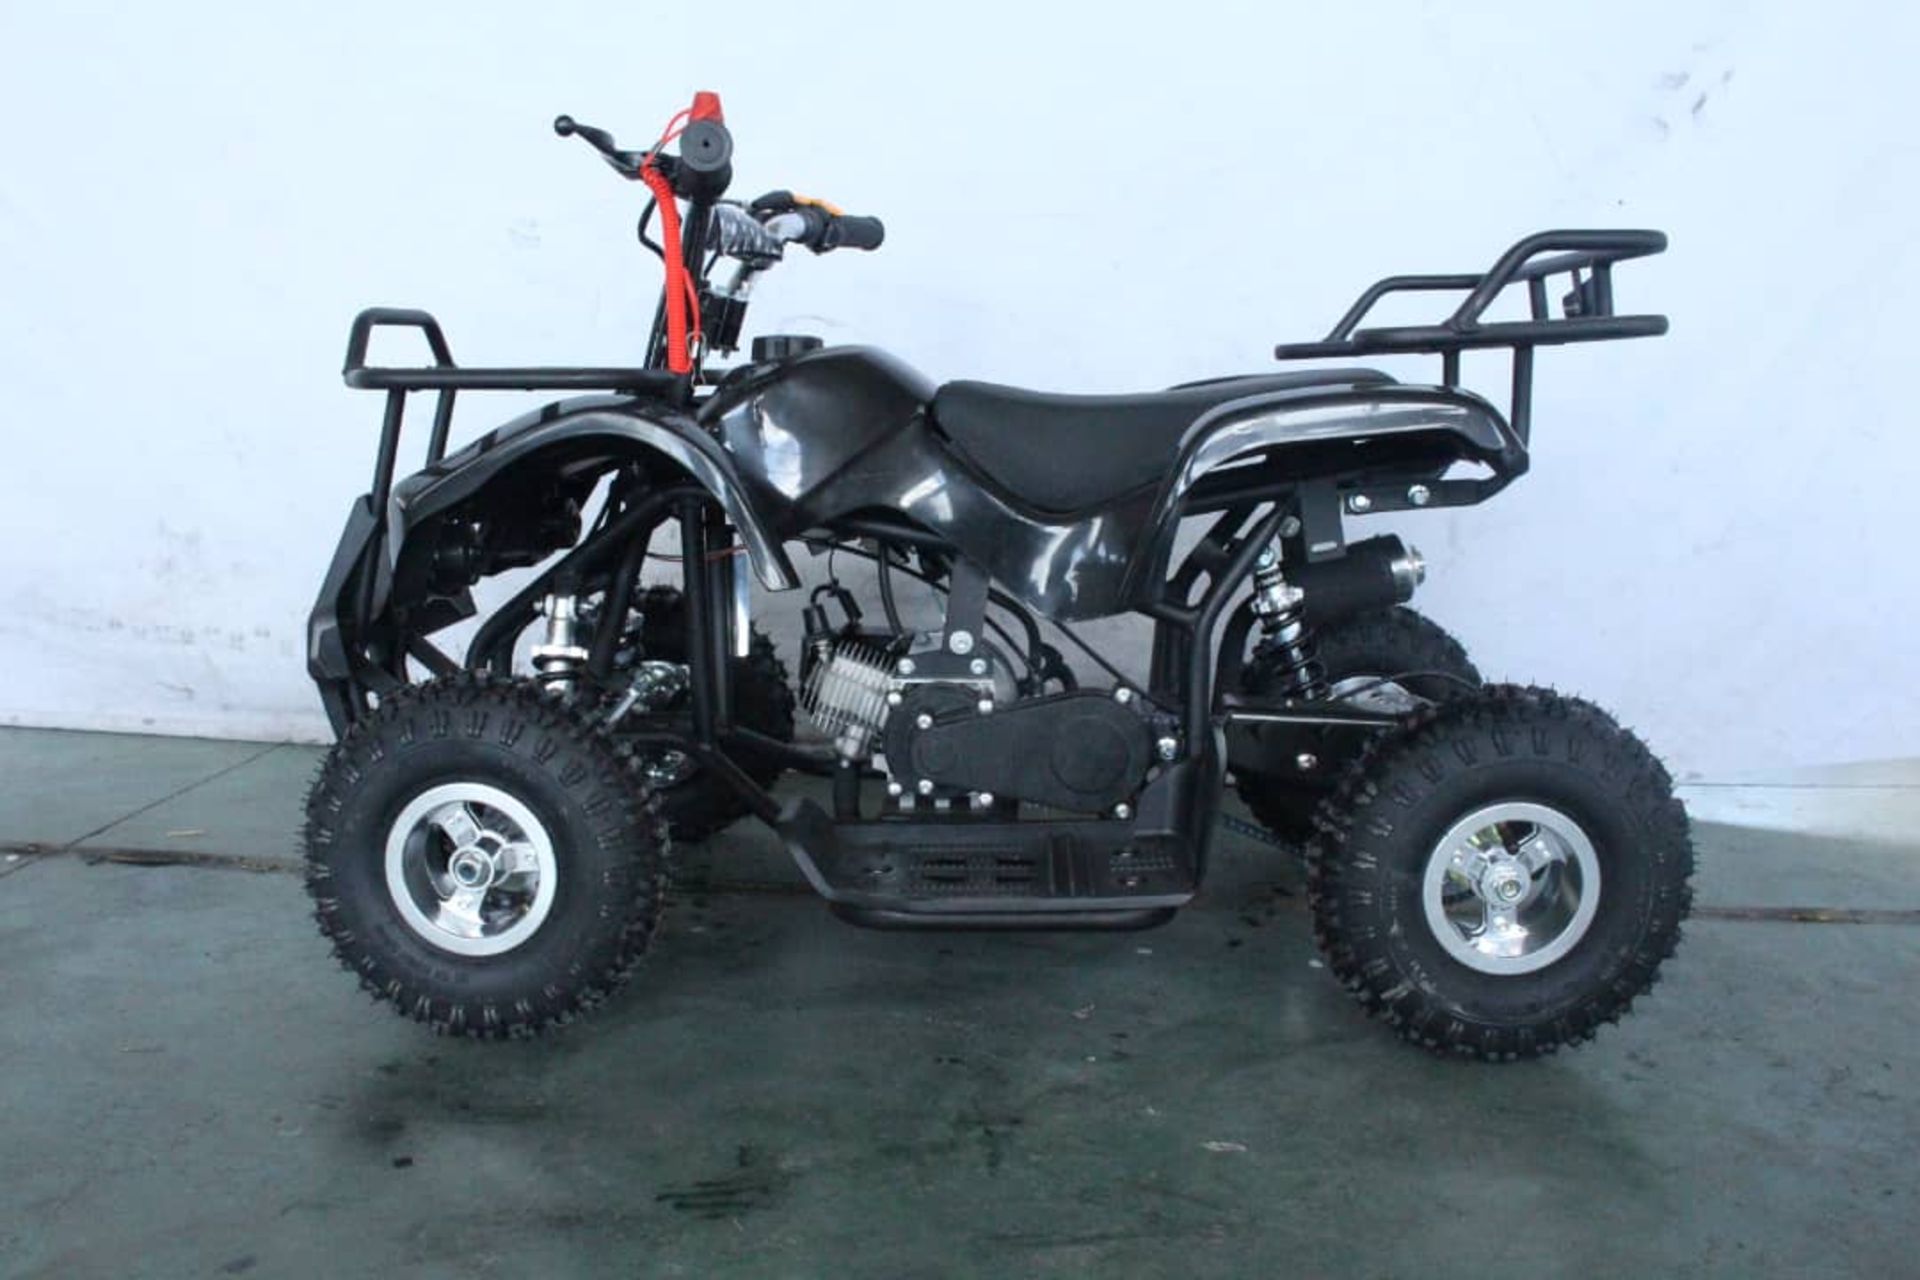 + VAT Brand New 49cc Hawk Mini Quad Bike - Colours May Vary - Full Front And Rear Suspension - Disk - Image 6 of 9